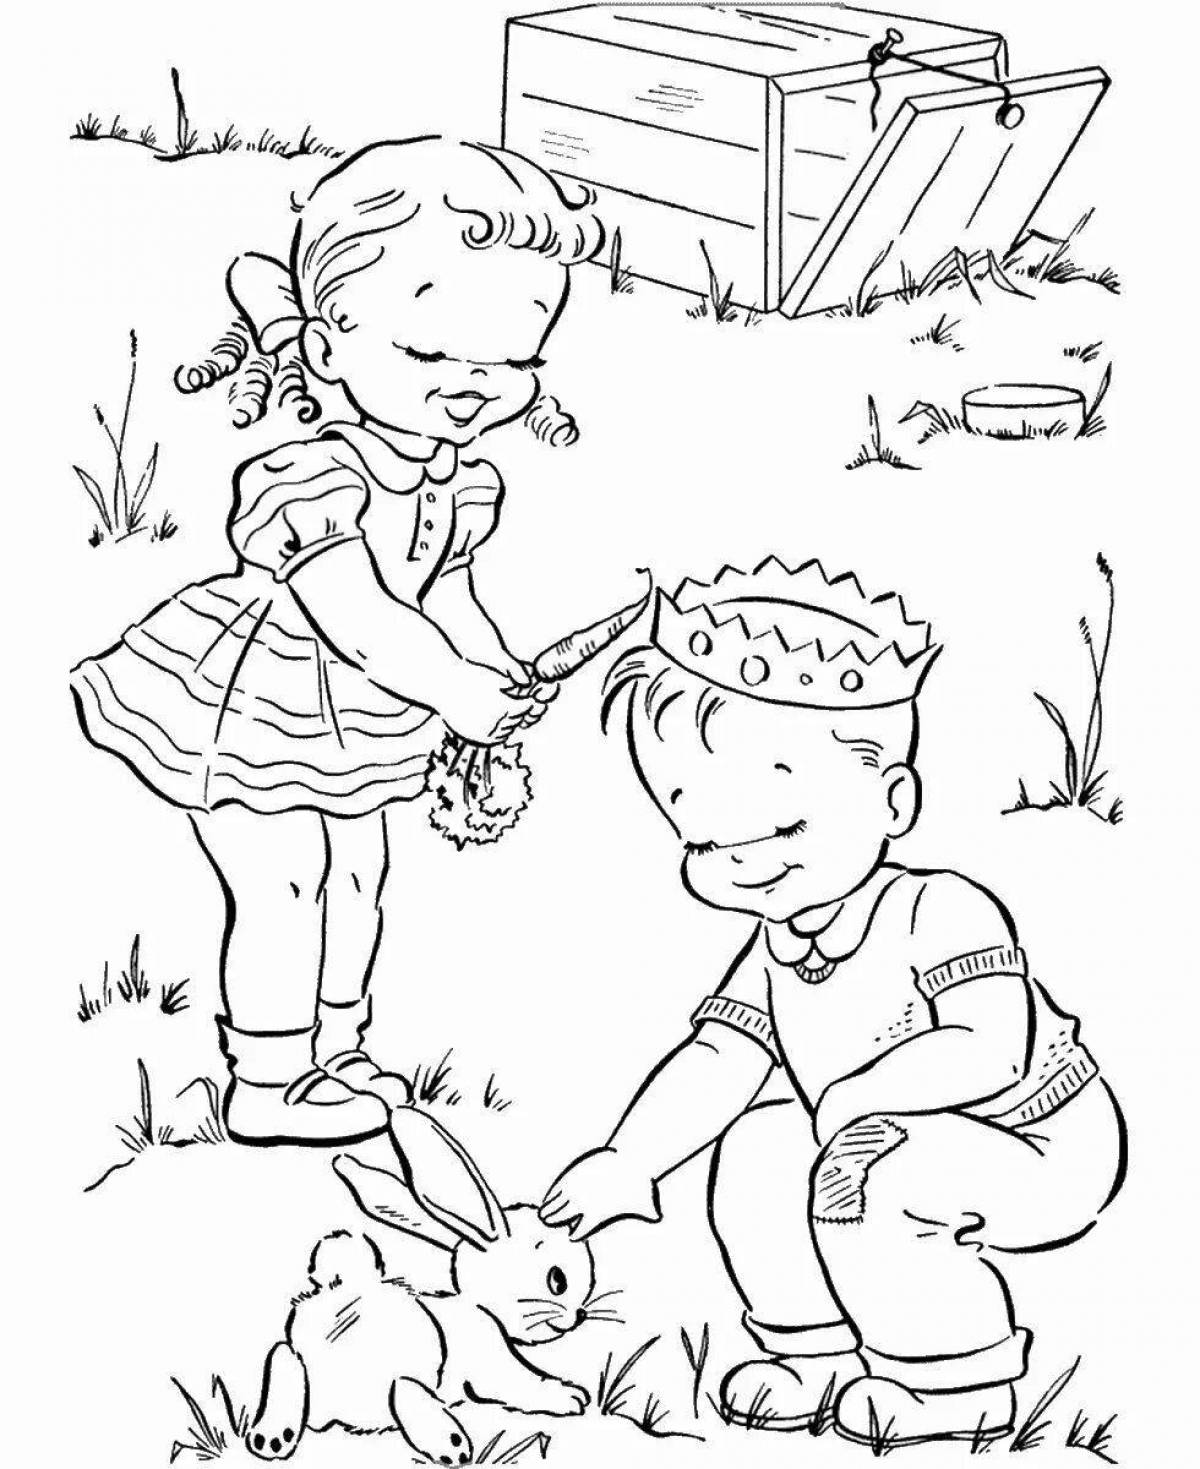 Bright nature care coloring page